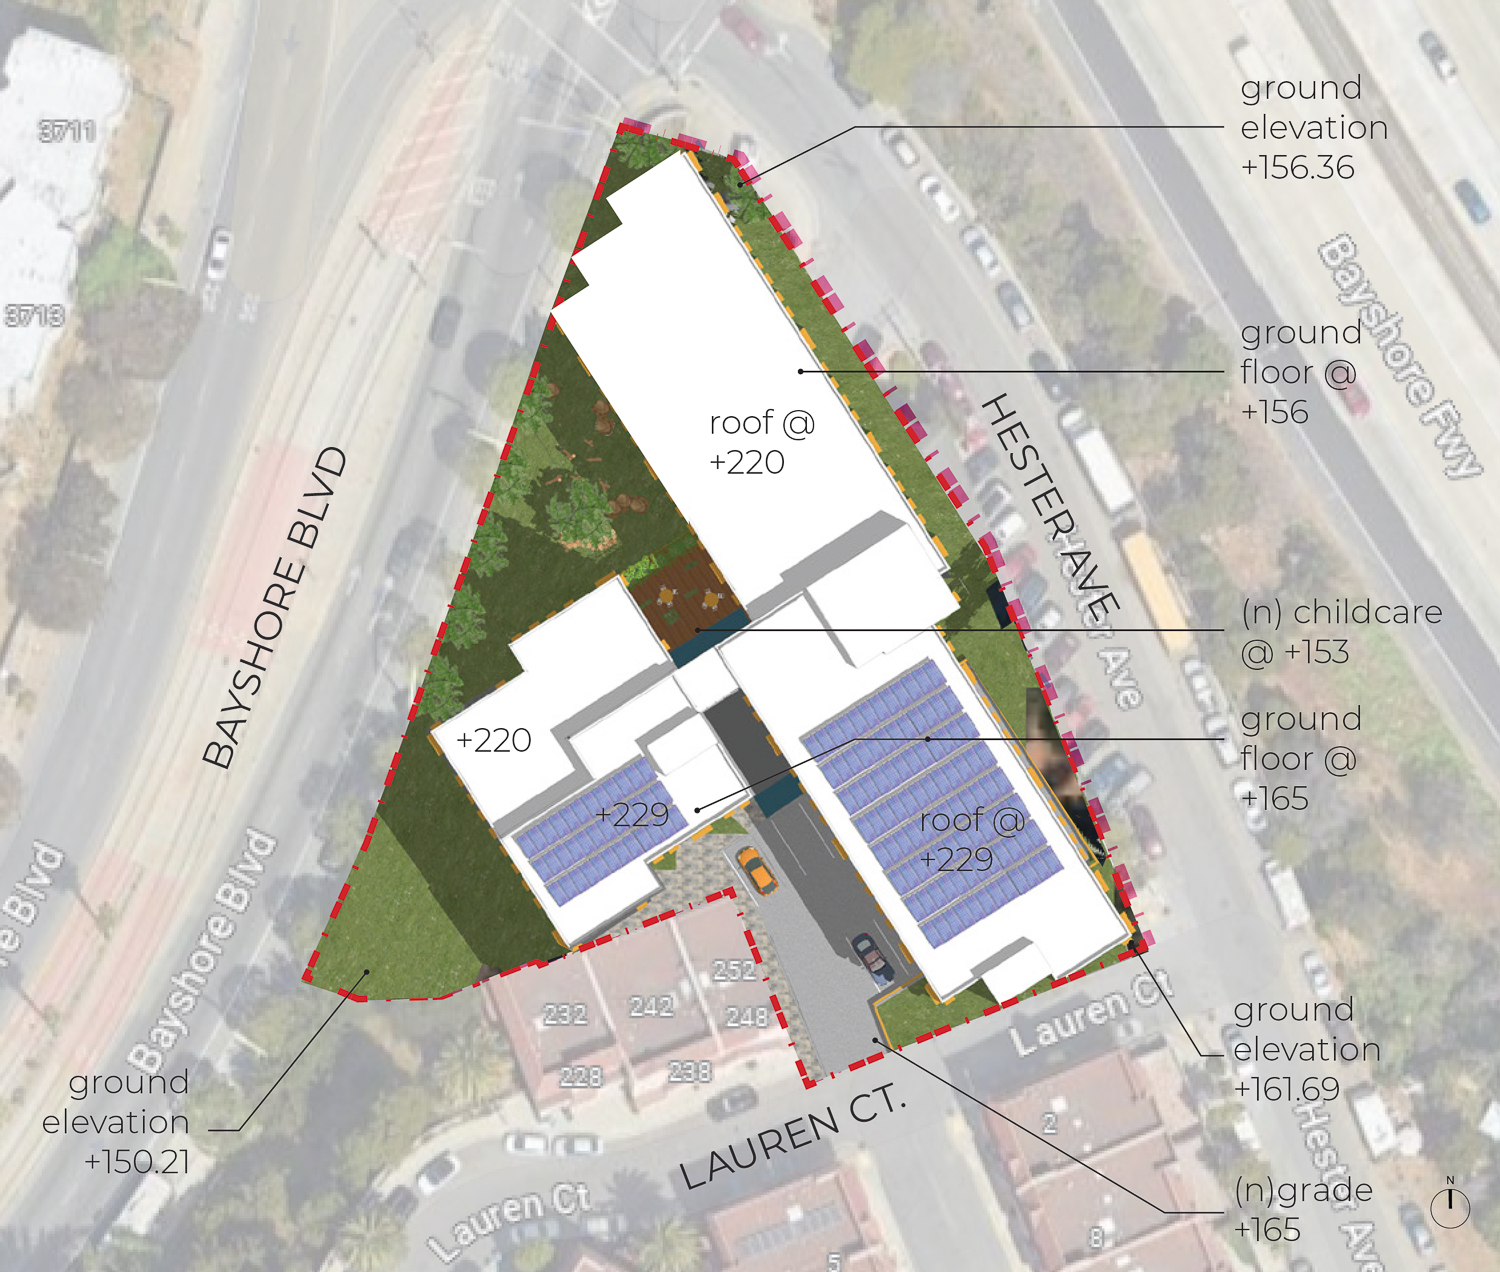 2011 Bayshore Boulevard site map, illustration by Gelfand Partners Architects